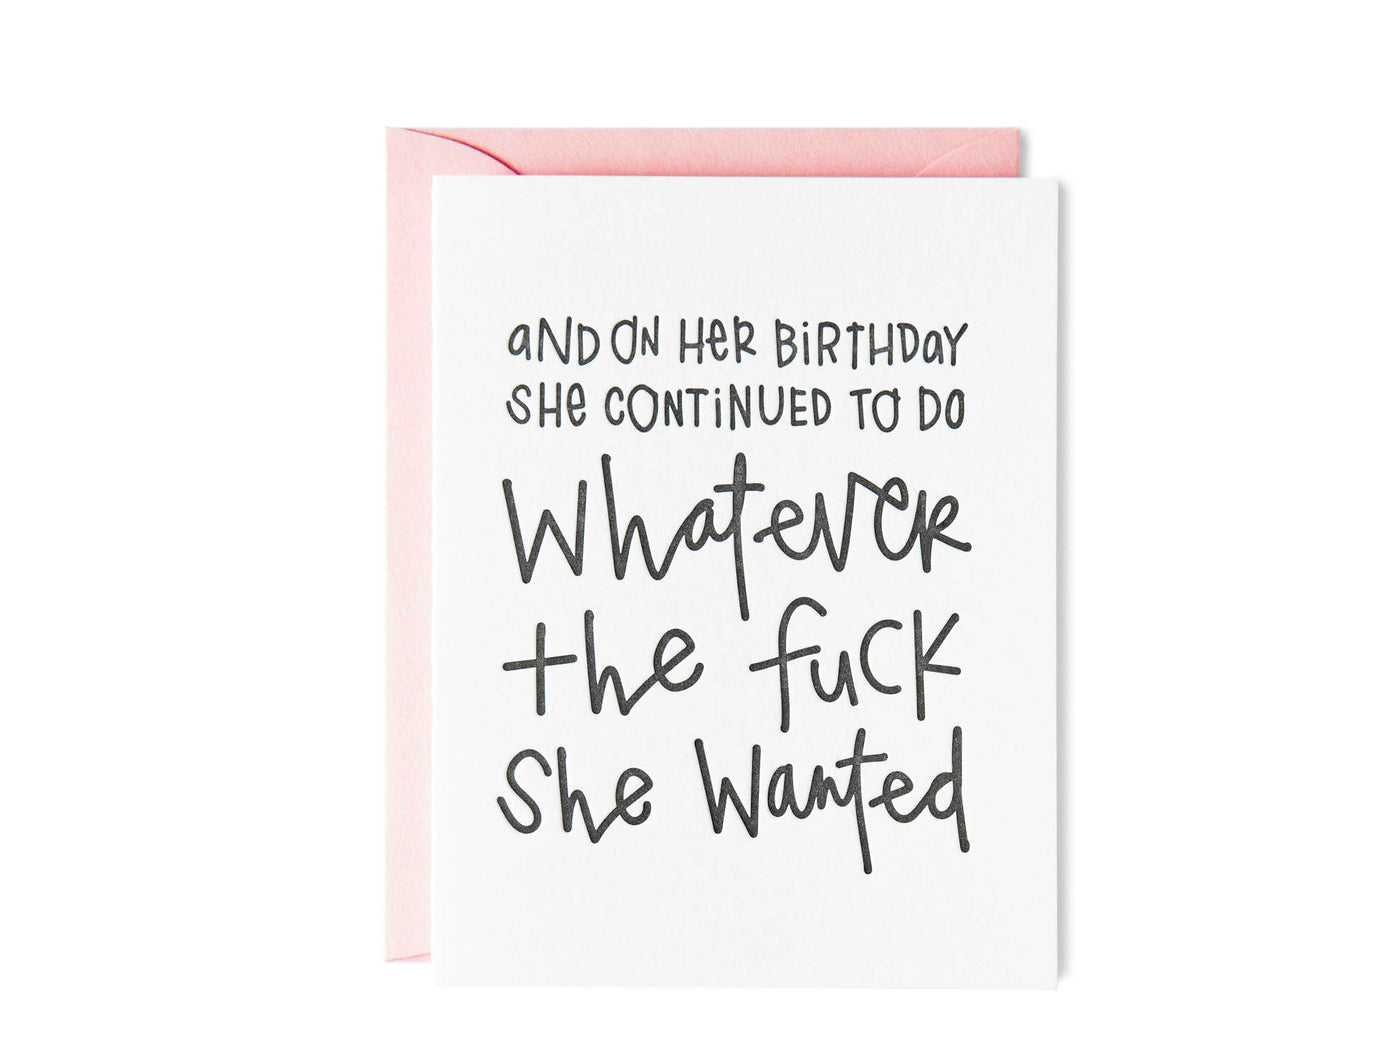 Paper Epiphanies - Whatever She Wanted Birthday - Chelsea Leifken Collab 2.0